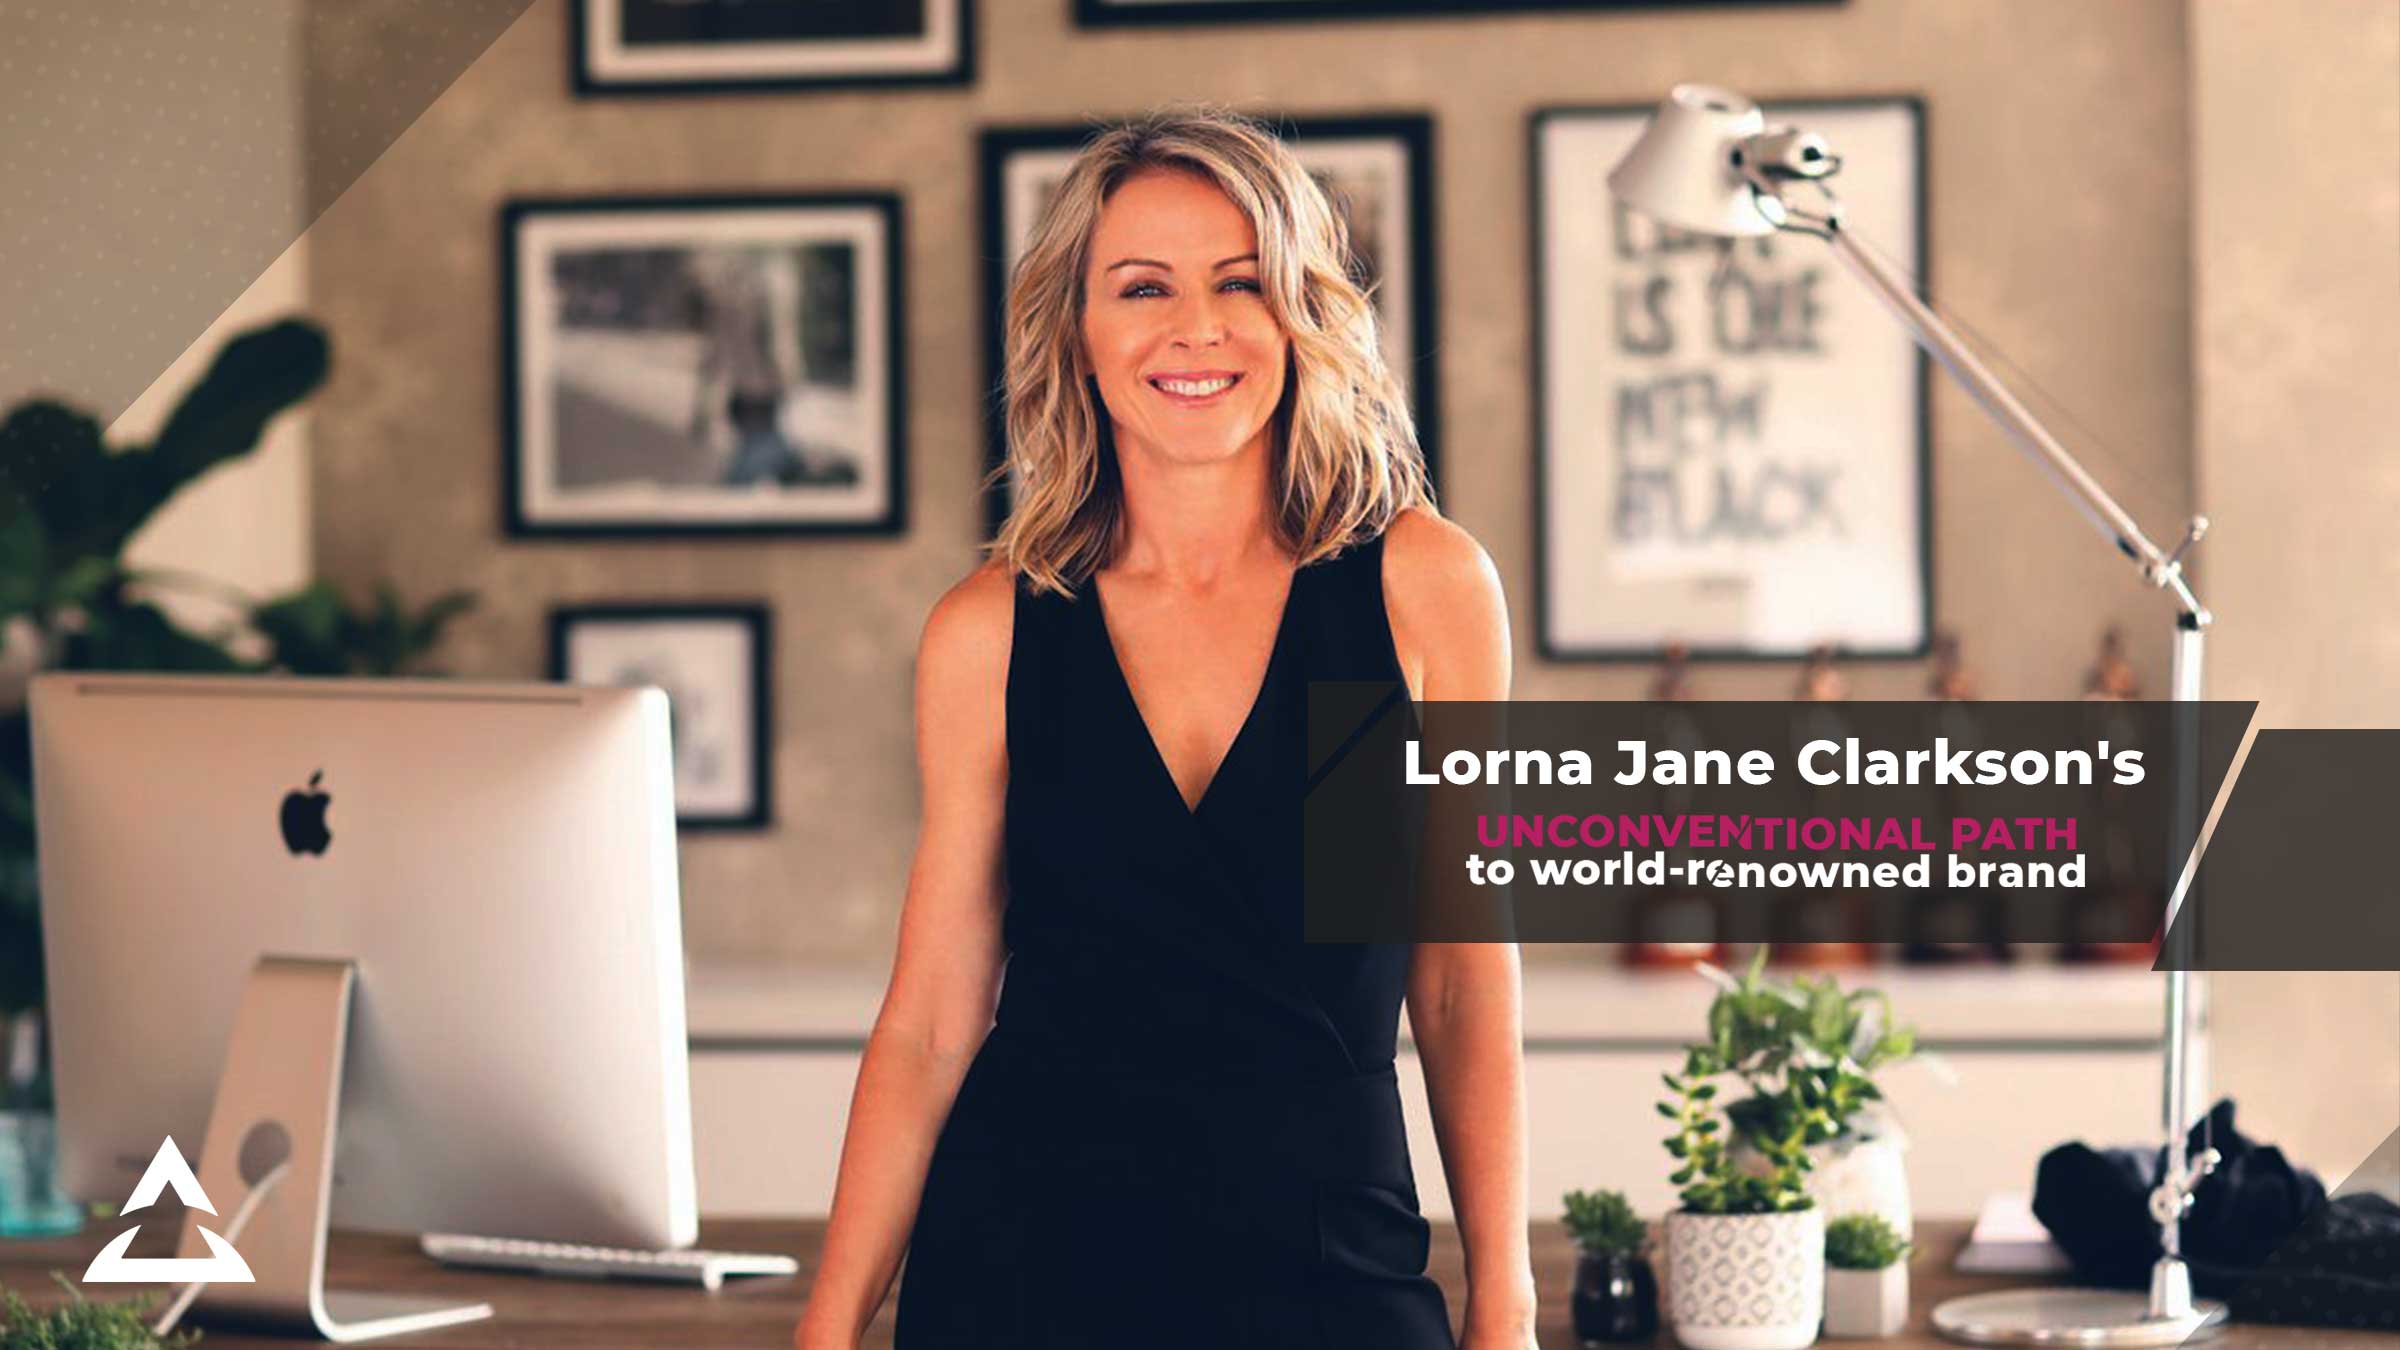 Lorna Jane Clarkson's unconventional path to success